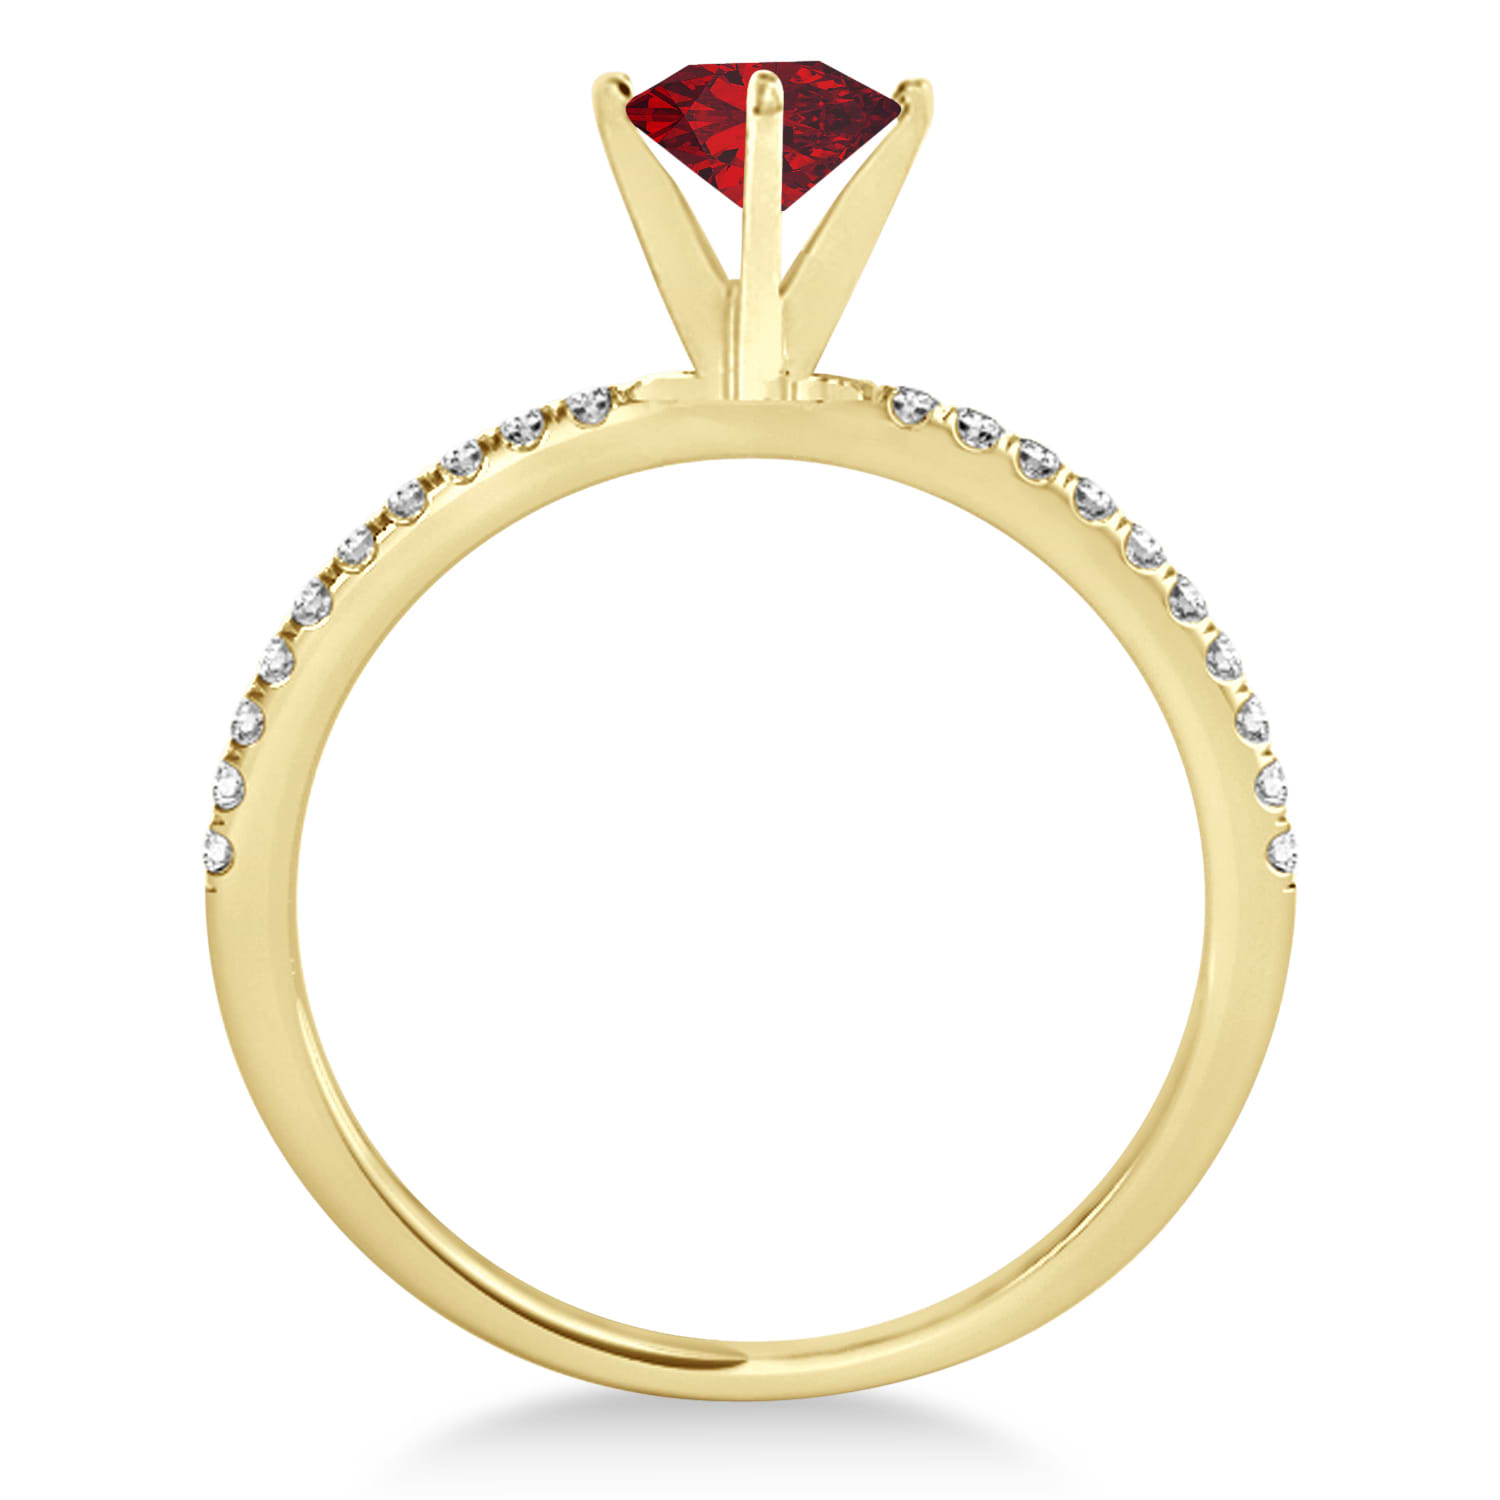 Ruby & Diamond Accented Oval Shape Engagement Ring 18k Yellow Gold (2.50ct)